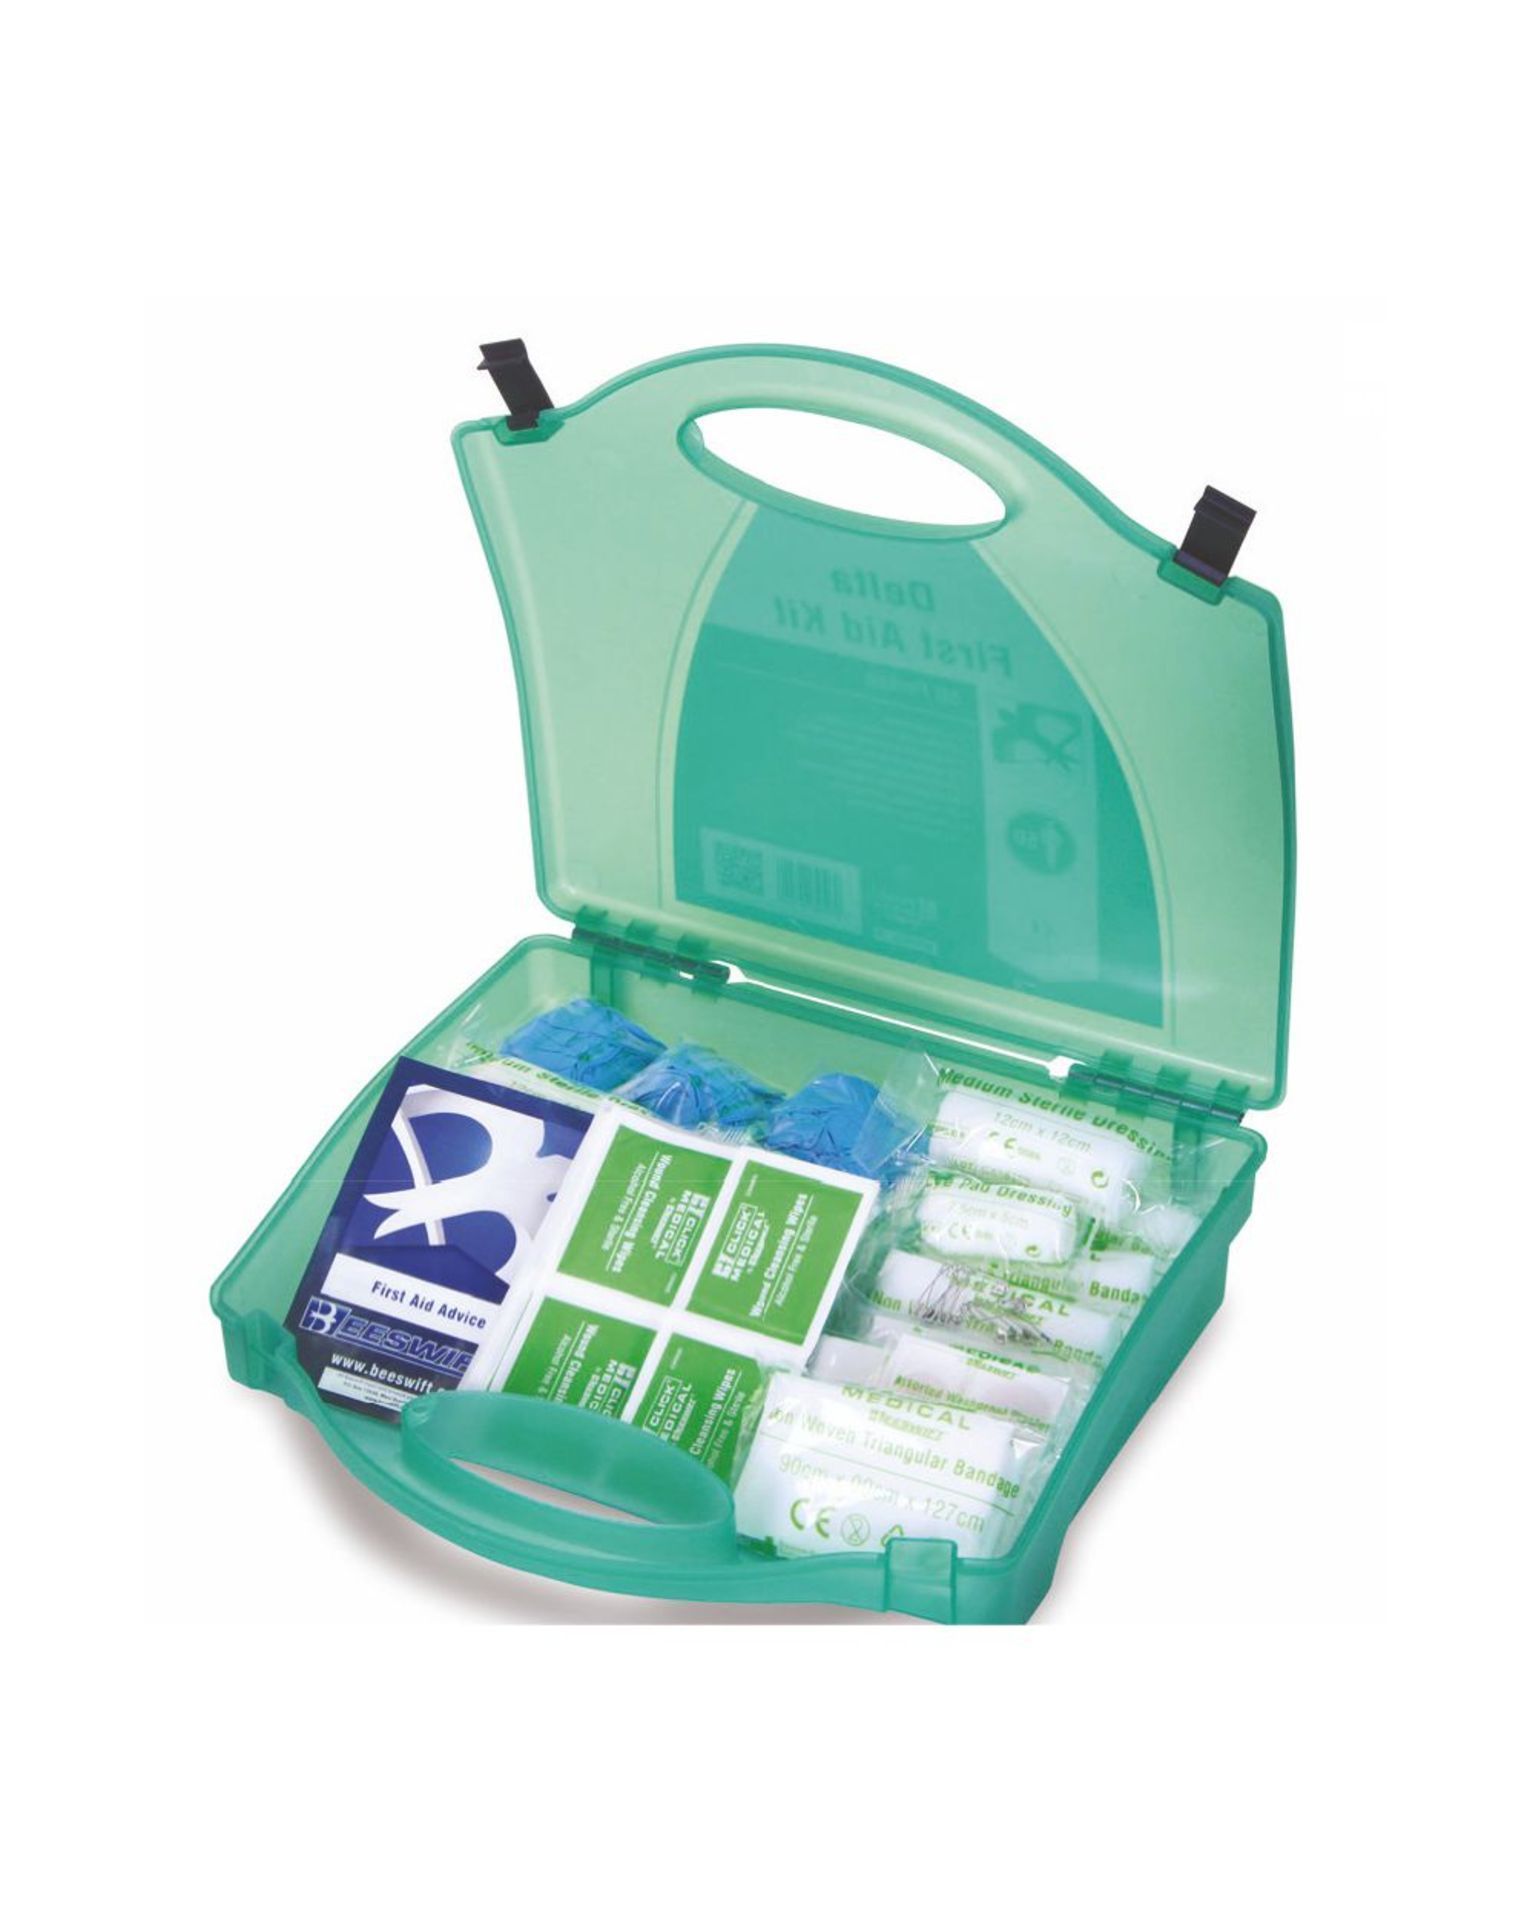 10 X BRAND NEW DELTA FIRST AID KITS 10 PERSON RRP £31 EACH R3.2